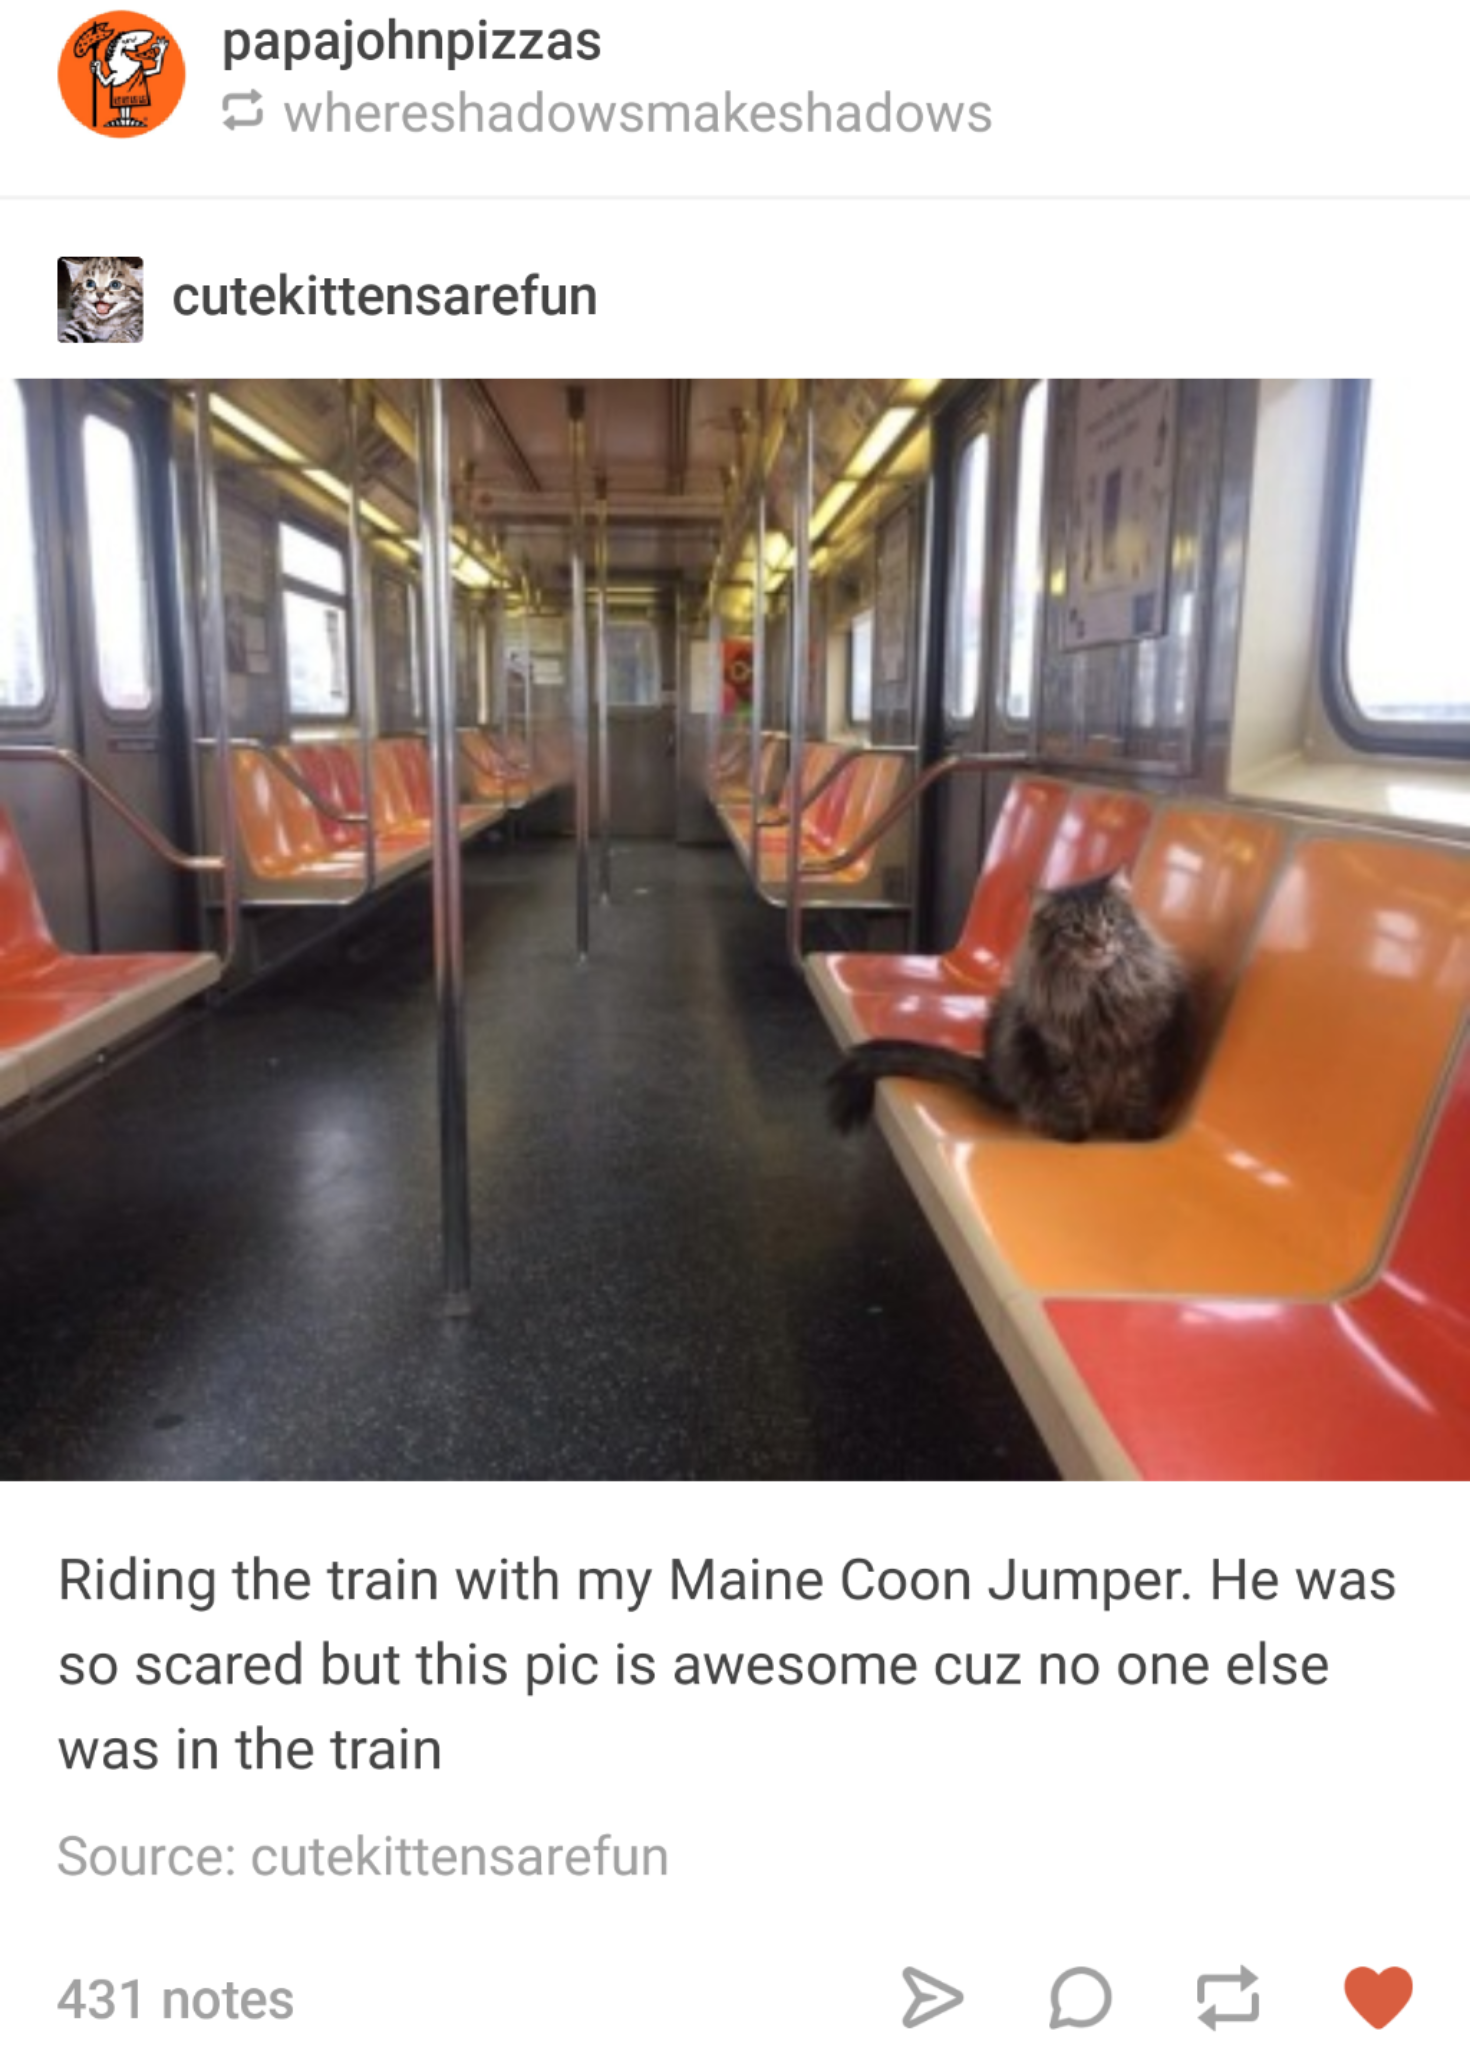 Why did you bring your cat on the train?